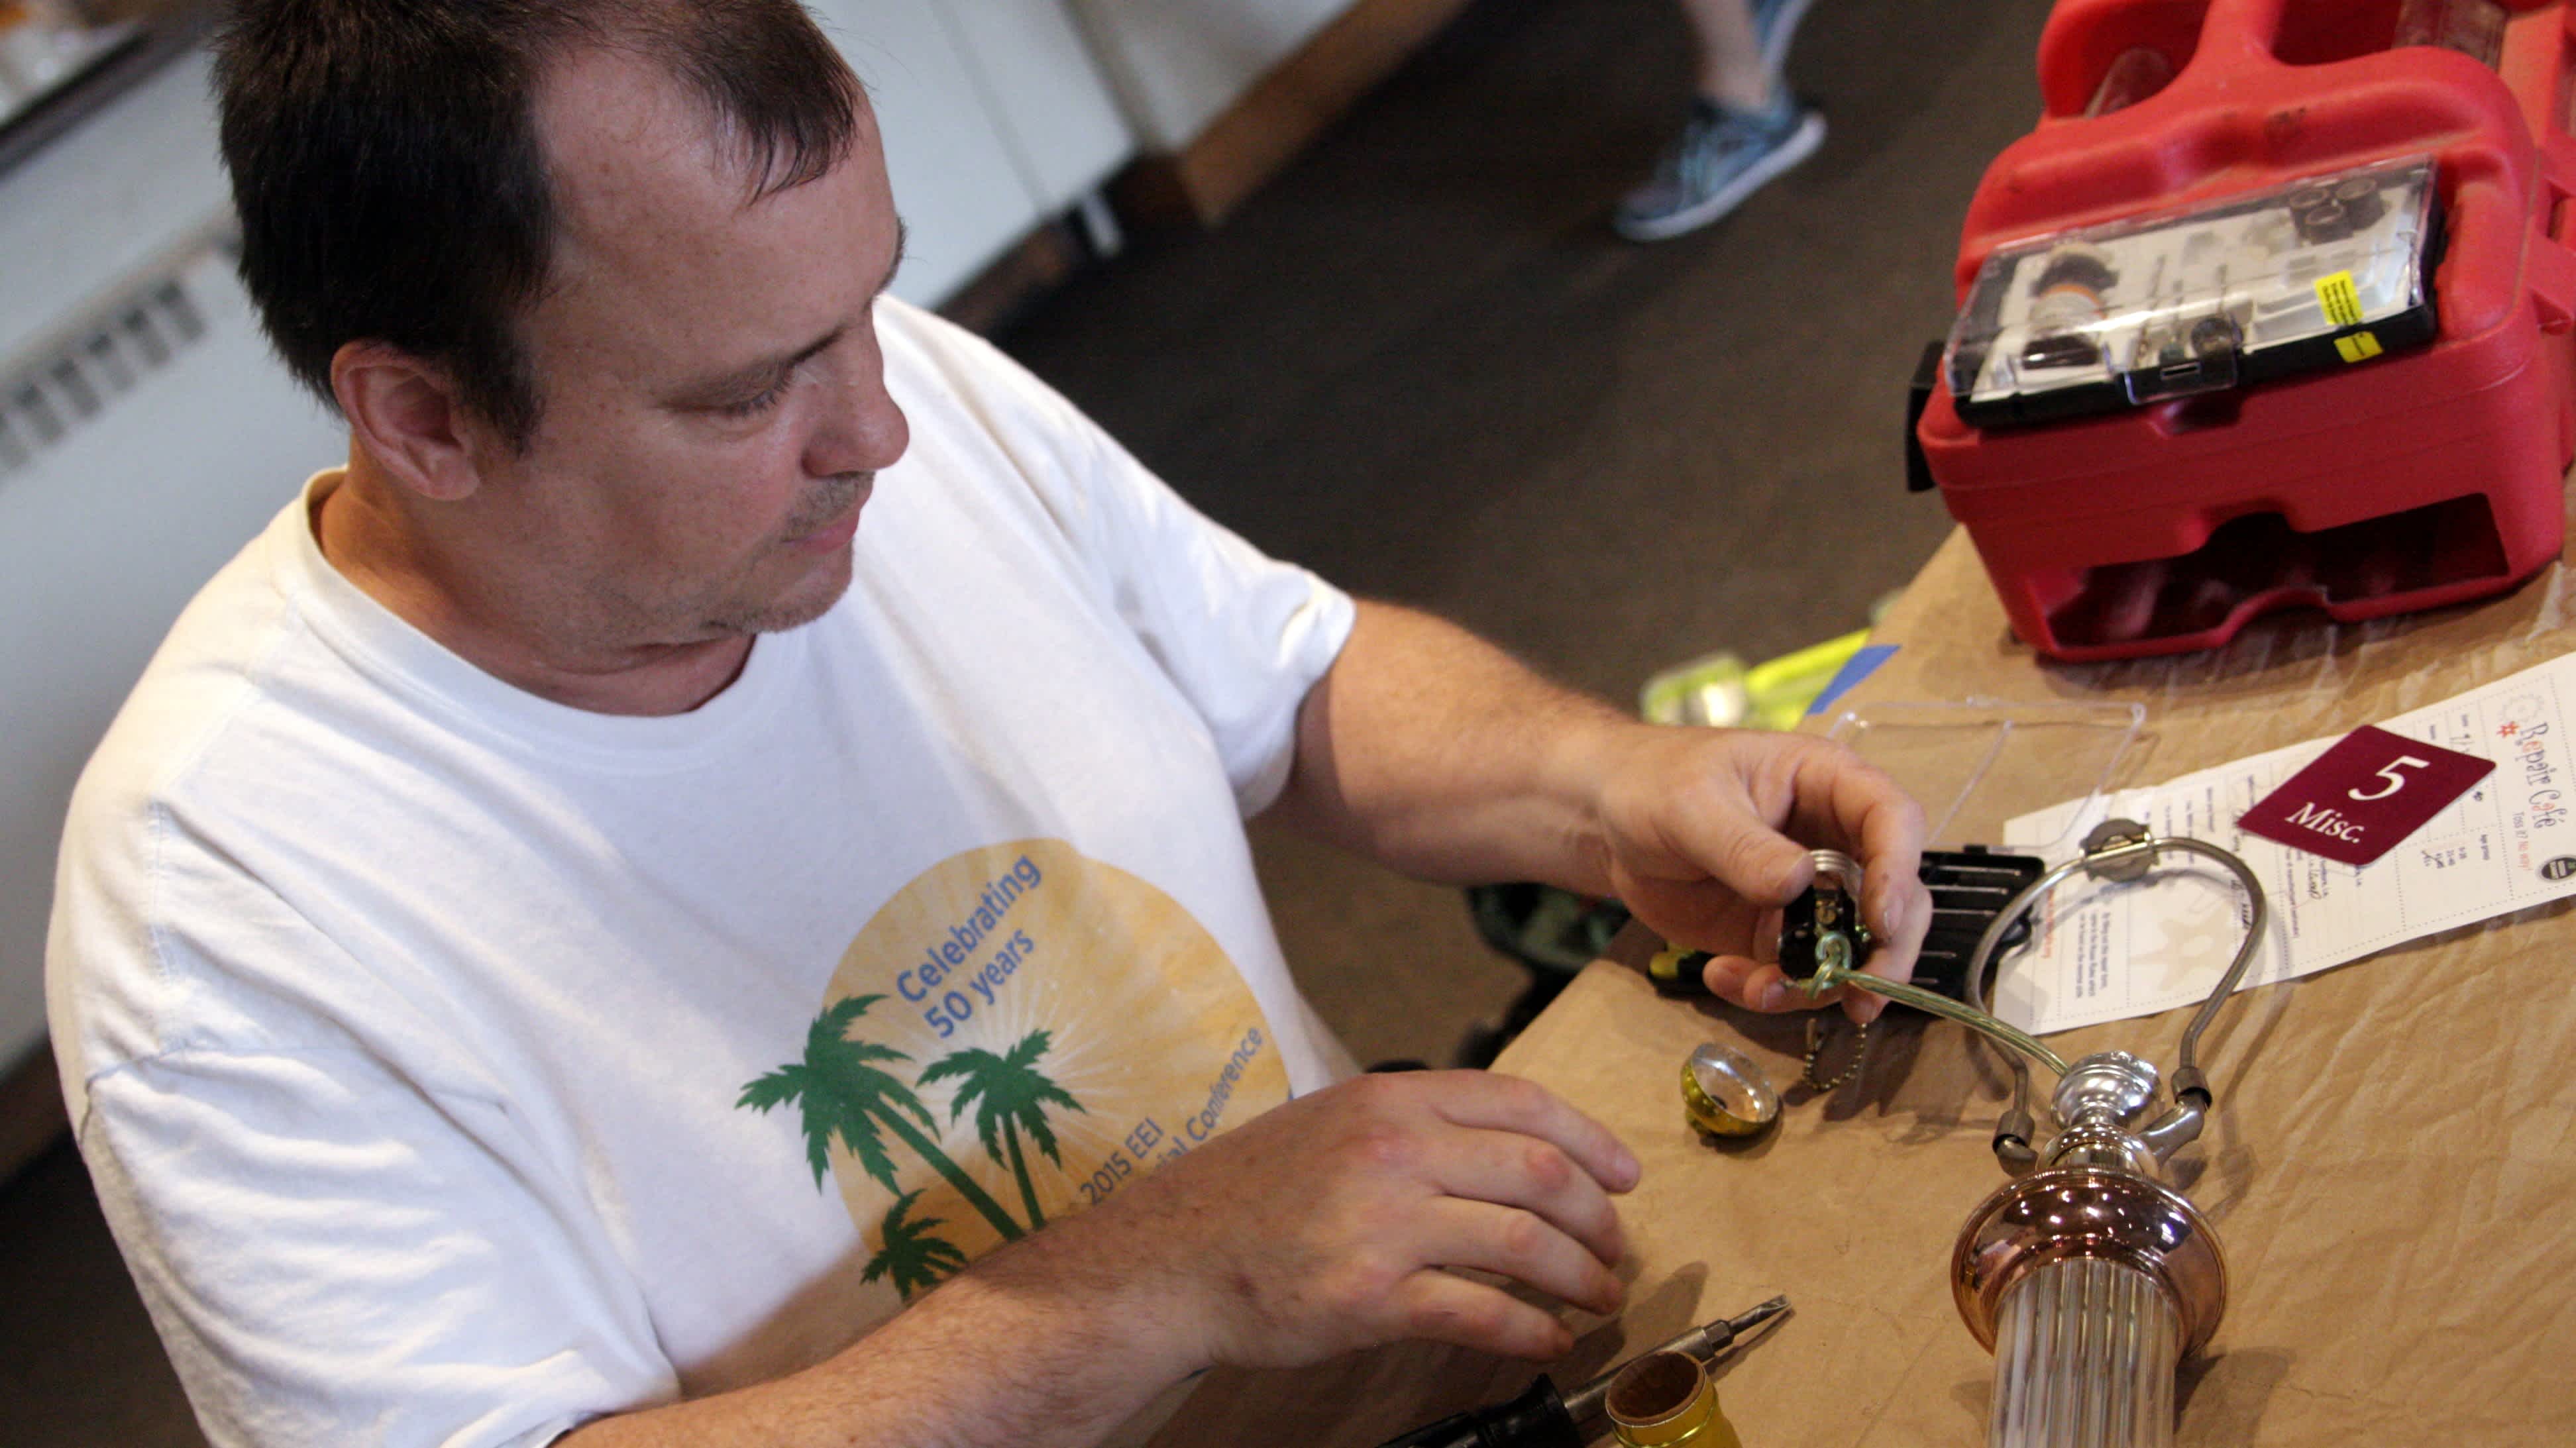 Featured Image Save your broken stuff for free at a Repair Cafe